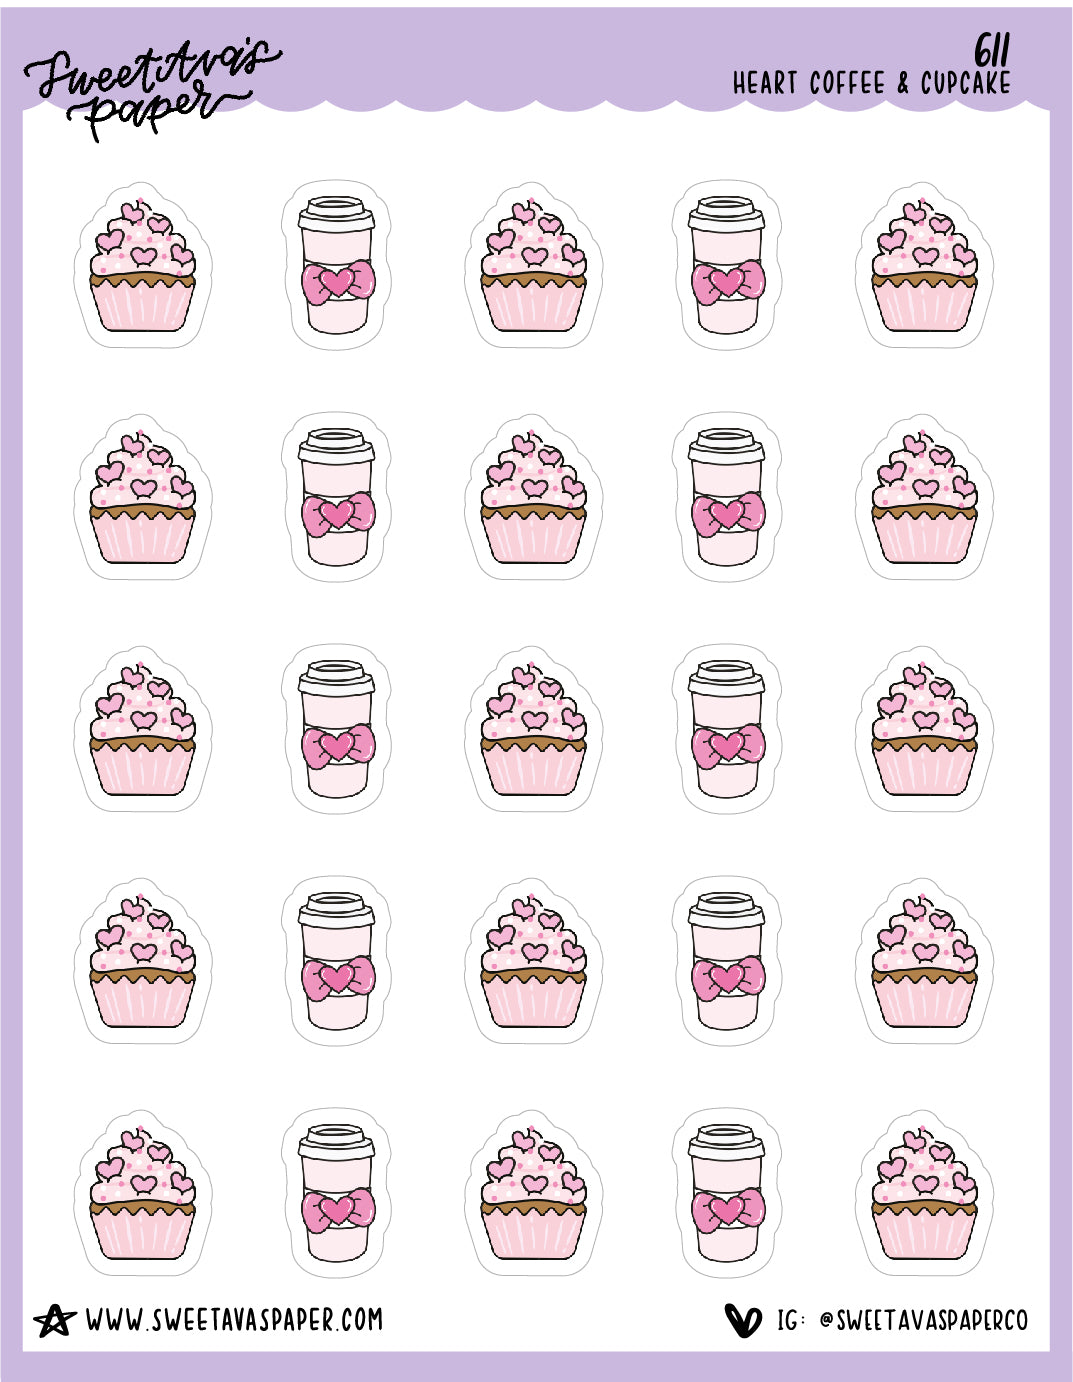 Coffee and Cupcakes Stickers - Doodles - [611]